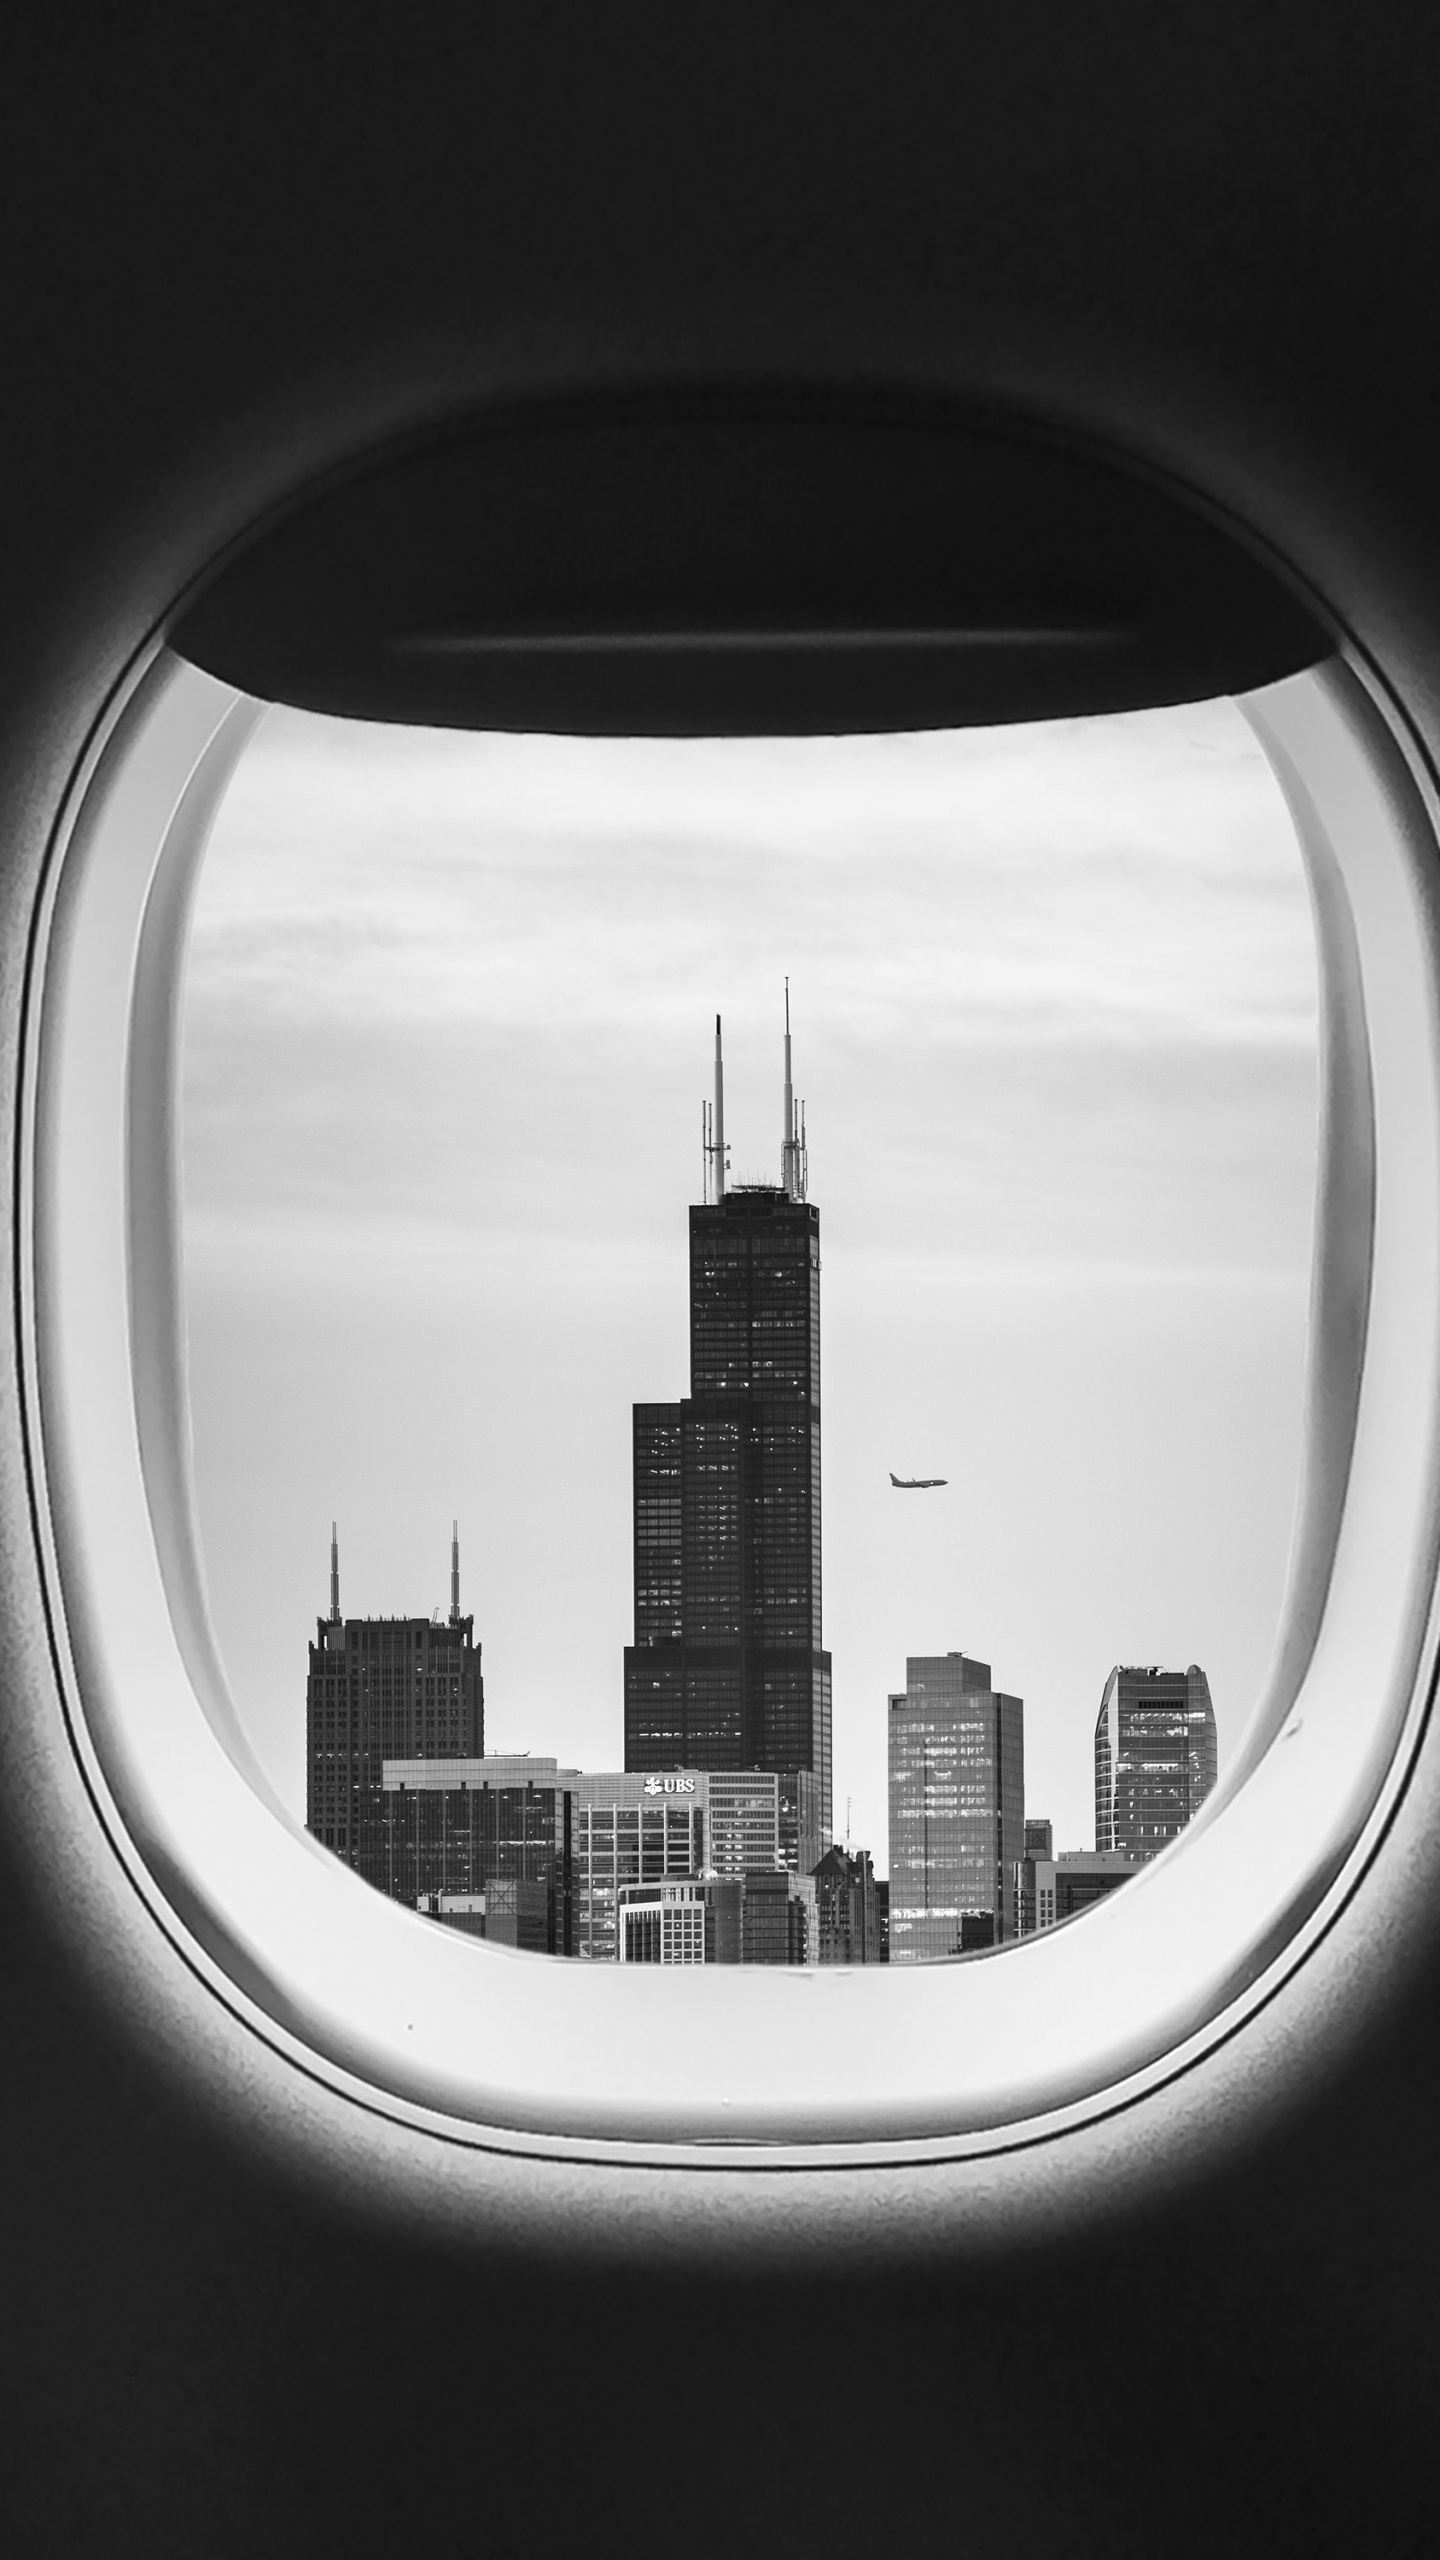 Airplane Window View of City Buildings During Daytime. Wallpaper in 1440x2560 Resolution